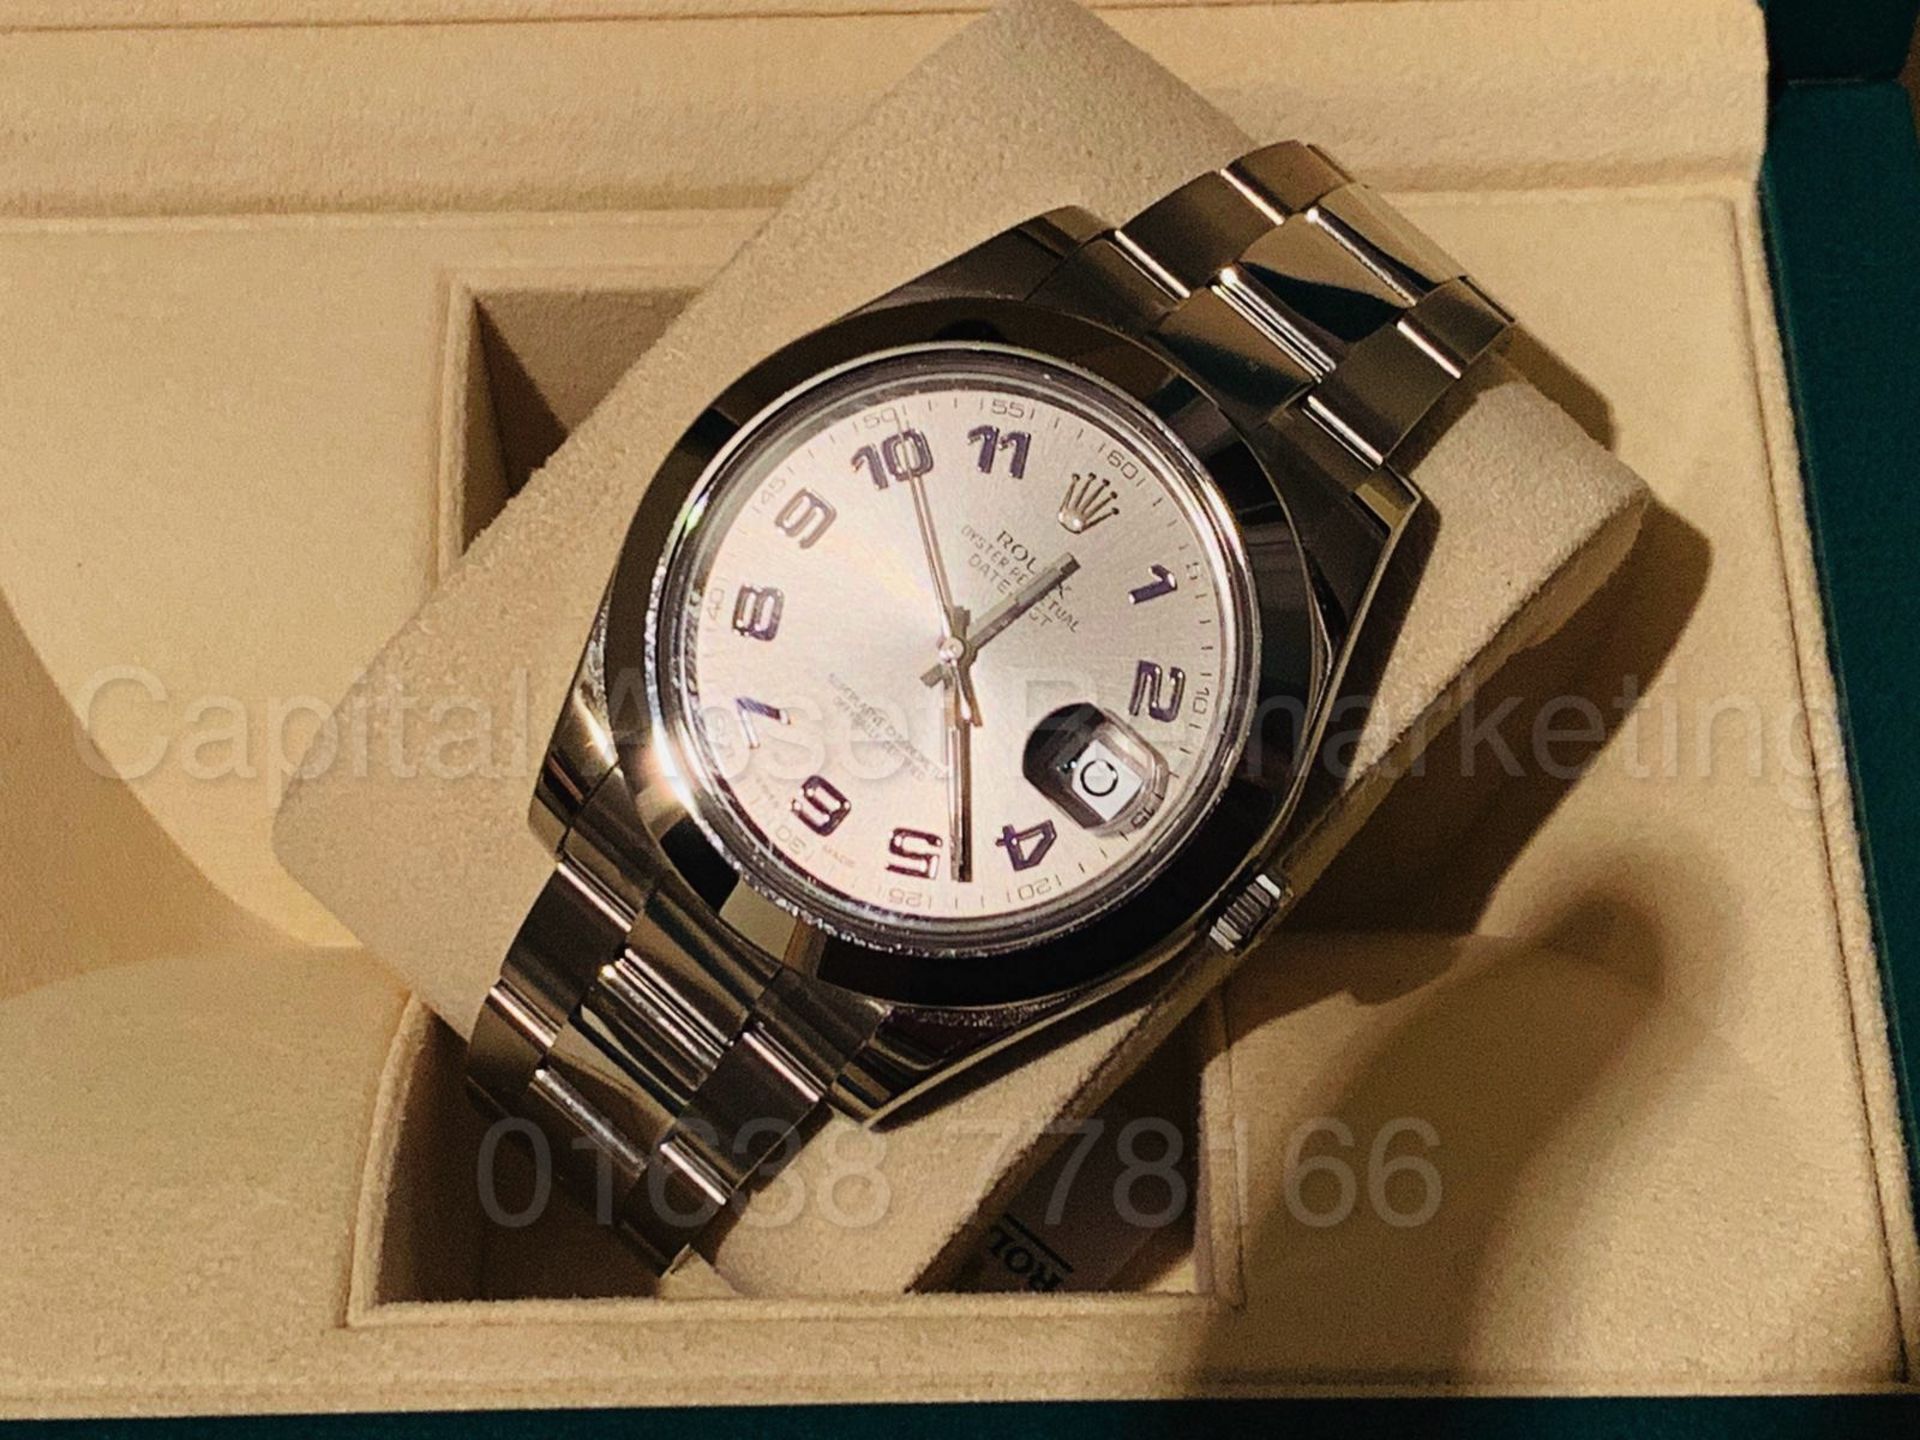 ROLEX OYSTER PERPETUAL *41MM DATEJUST* (BRAND NEW / UN-WORN) *GENUINE* (ALL PAPERWORK & BOX PRESENT) - Image 4 of 10